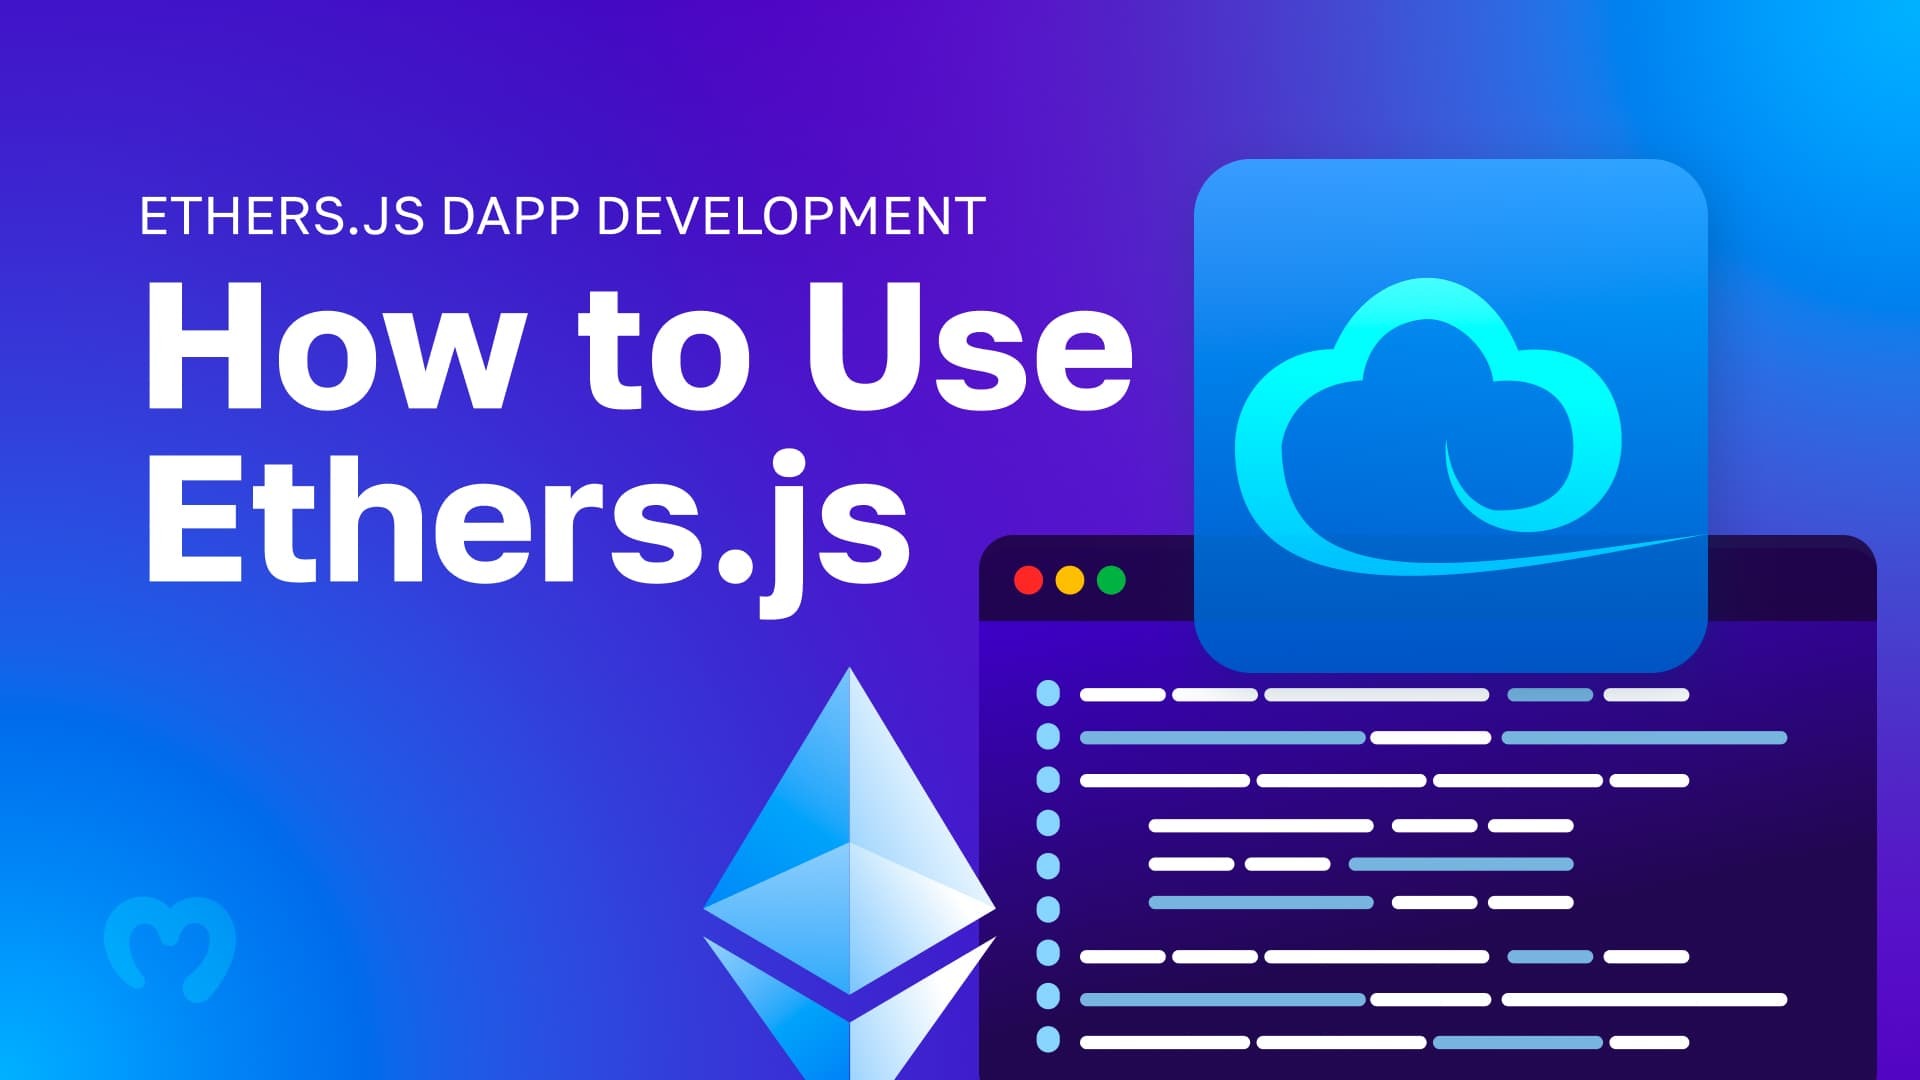 Exploring Ethers.js Dapp Development - How to Use Ethers.js